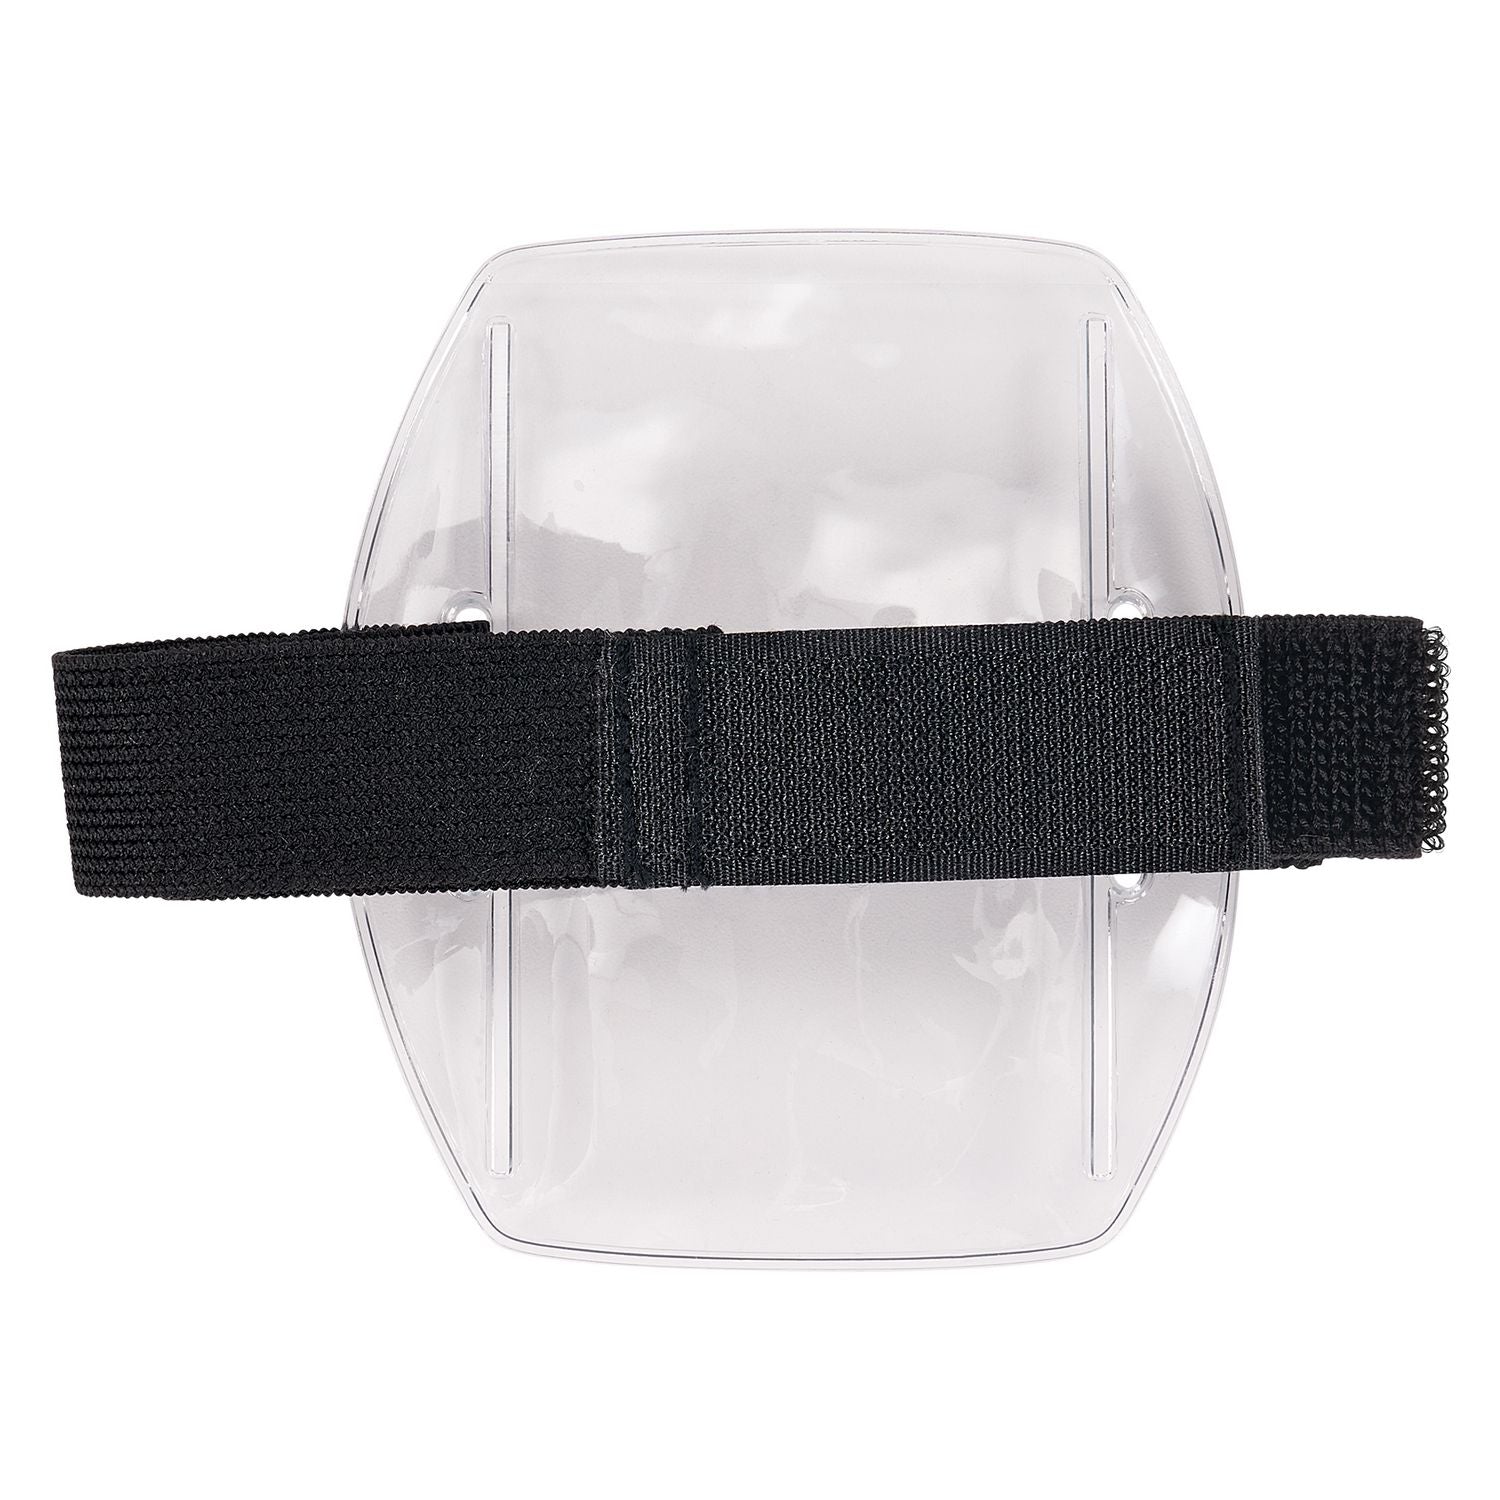 squids-3386-arm-band-id-badge-holder-vertical-black-clear-375-x-425-for-25-x-4-insert-10-pack-ships-in-1-3-bus-days_ego19975 - 2